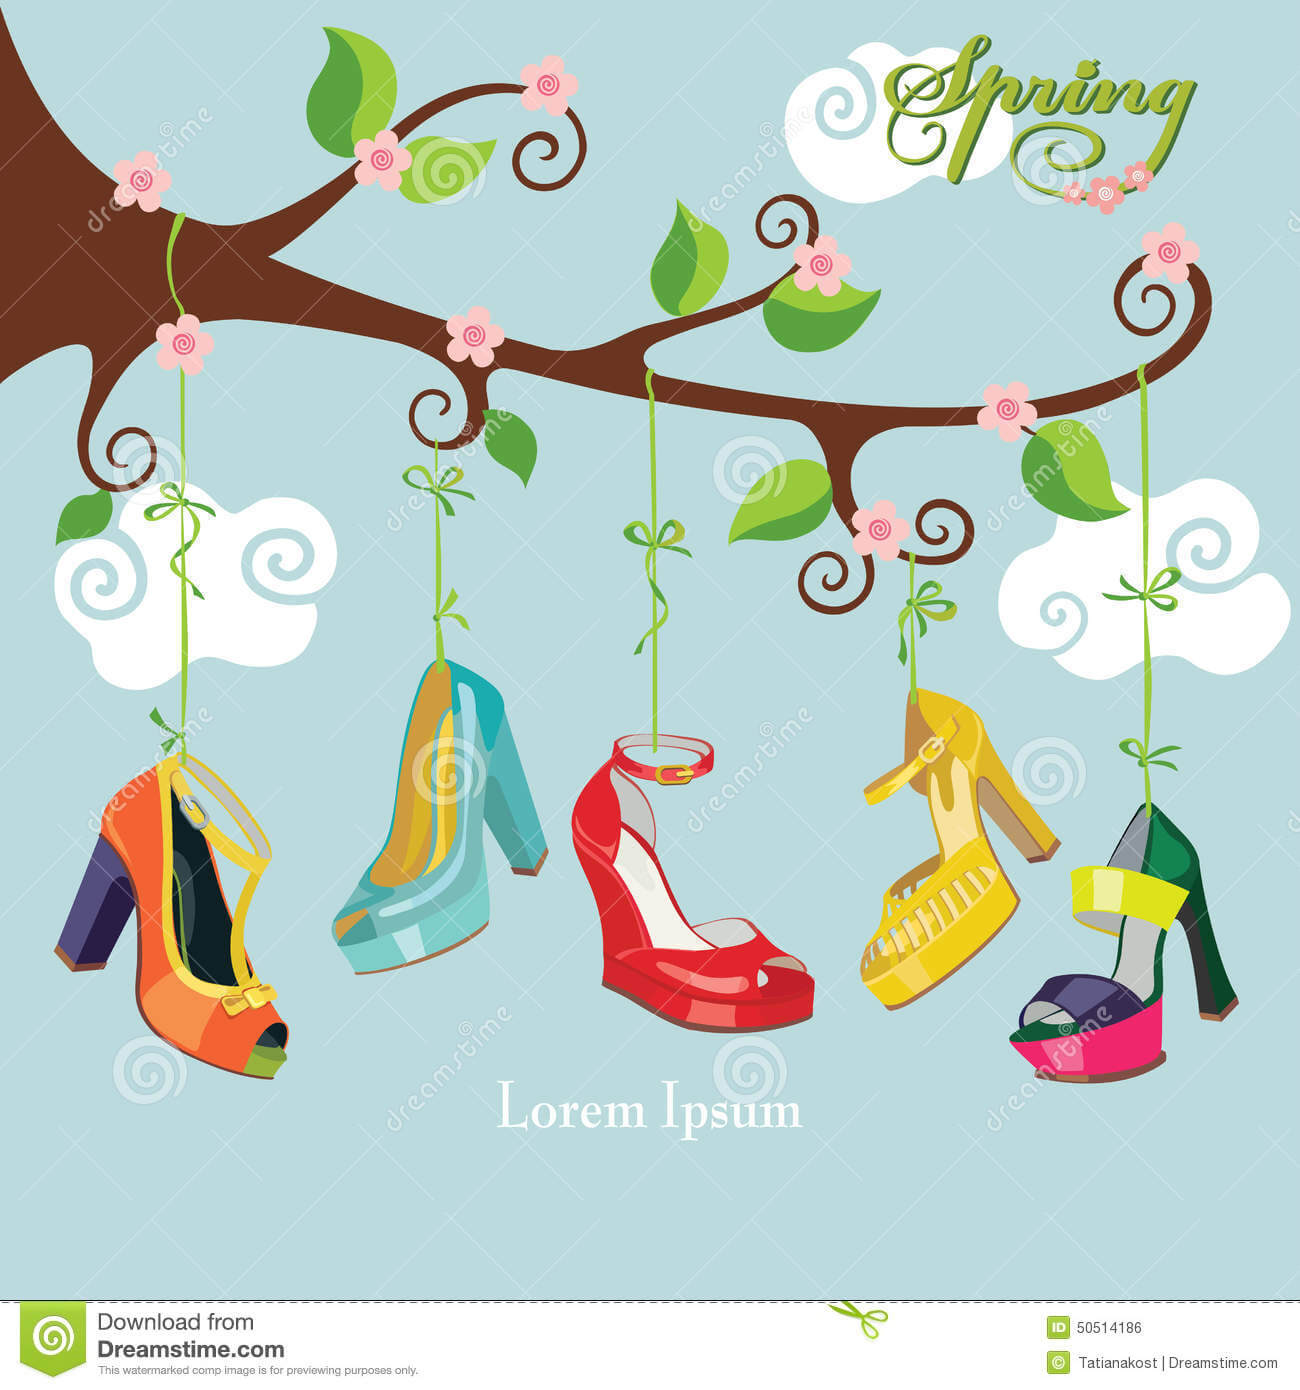 Spring Flowering Branch And Colored High Heel Stock Vector For High Heel Shoe Template For Card